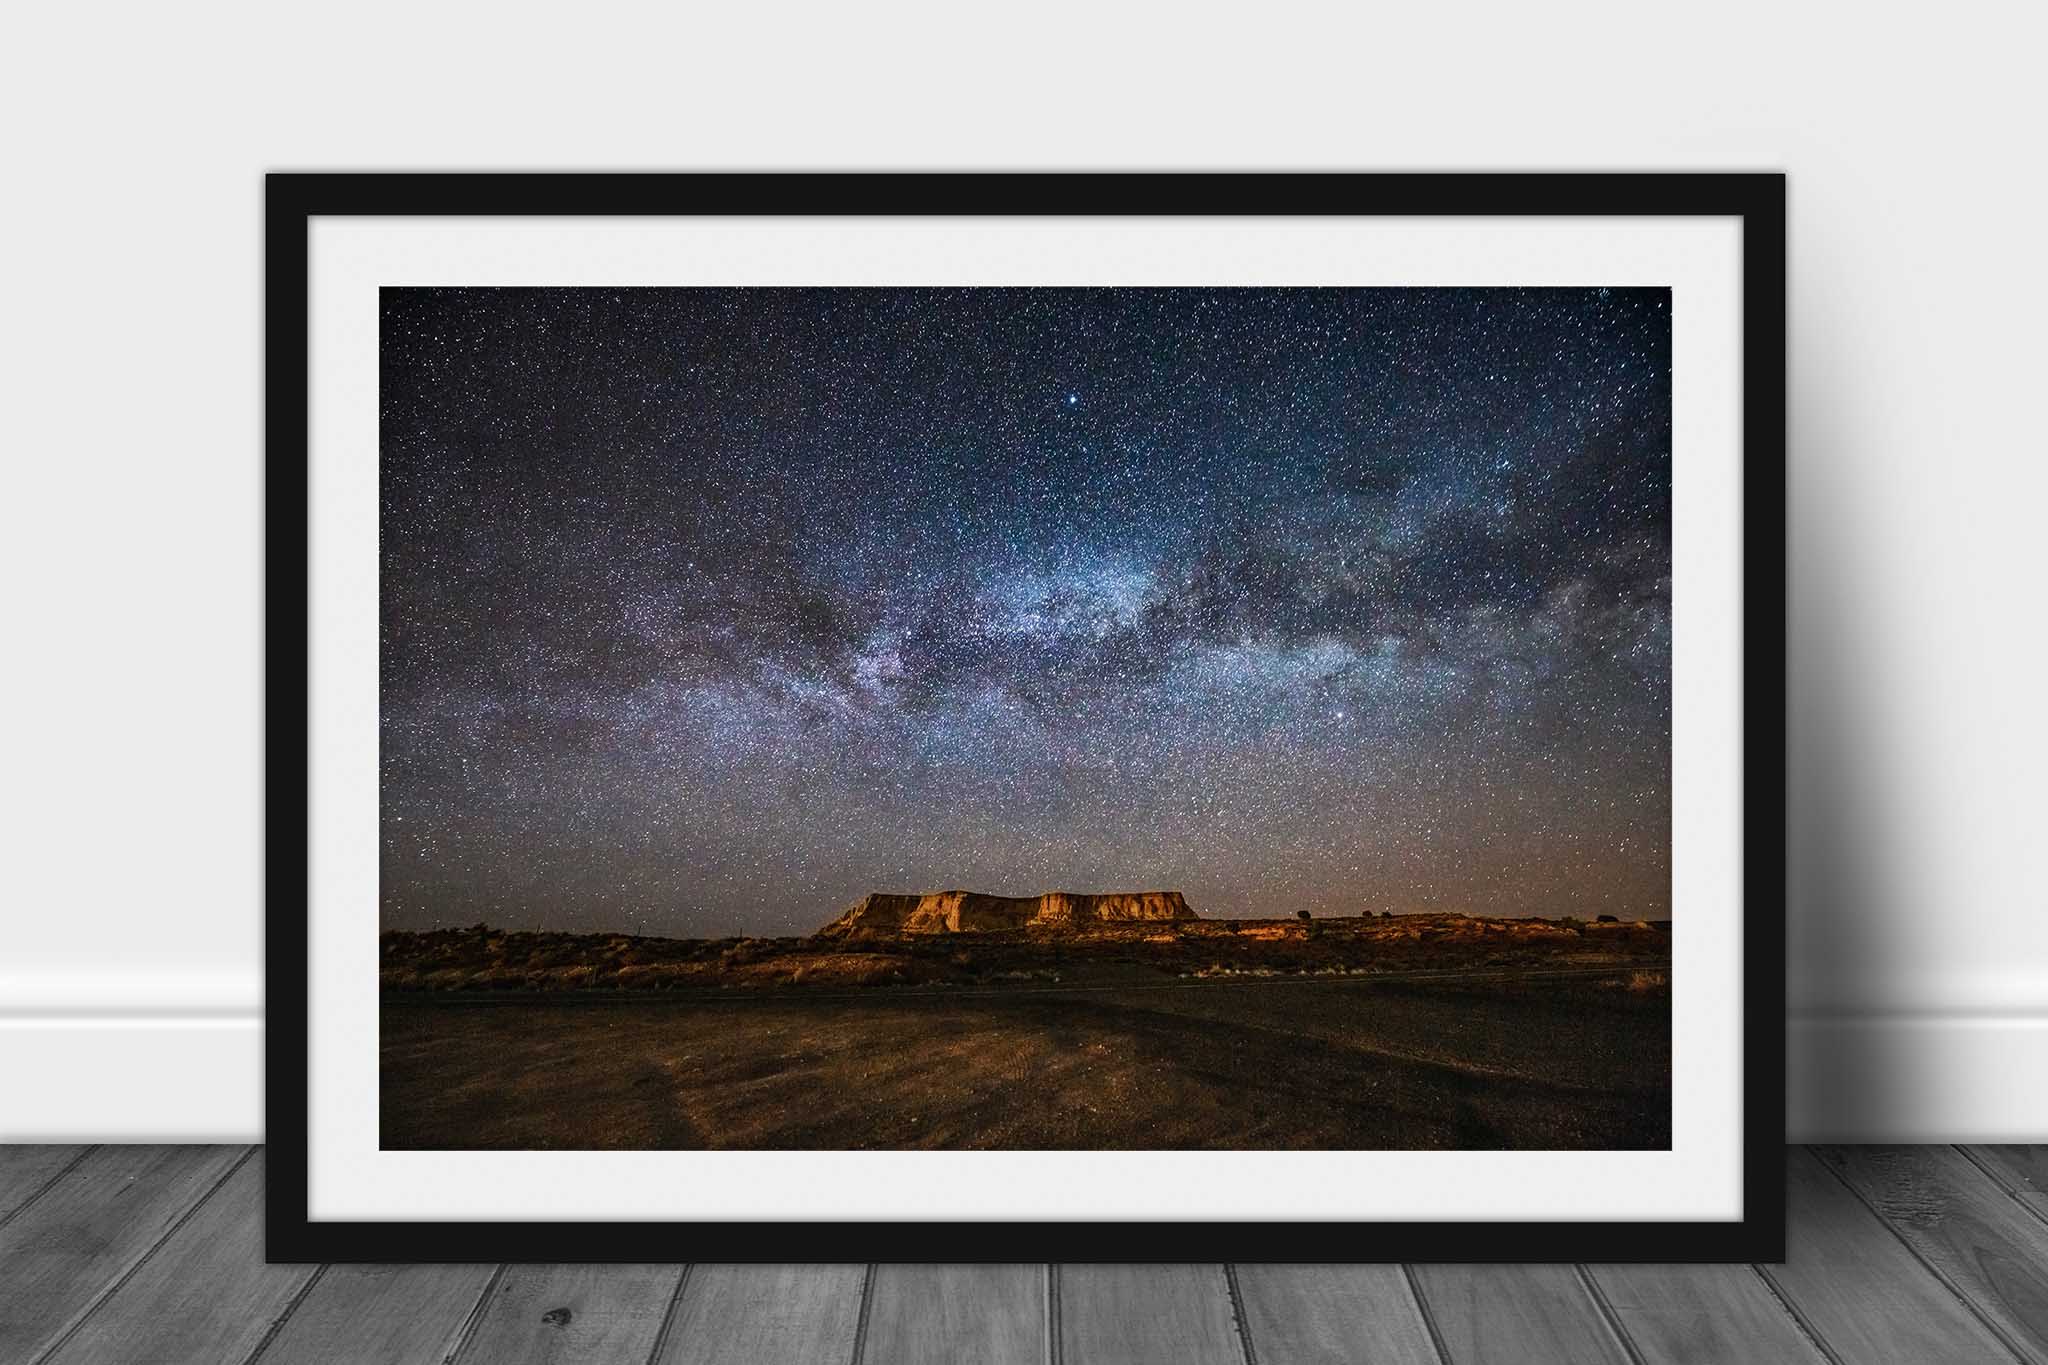 Celestial framed print with optional mat of the Milky Way spanning the horizon over a mesa in a starry night sky in the Arizona desert by Sean Ramsey of Southern Plains Photography.